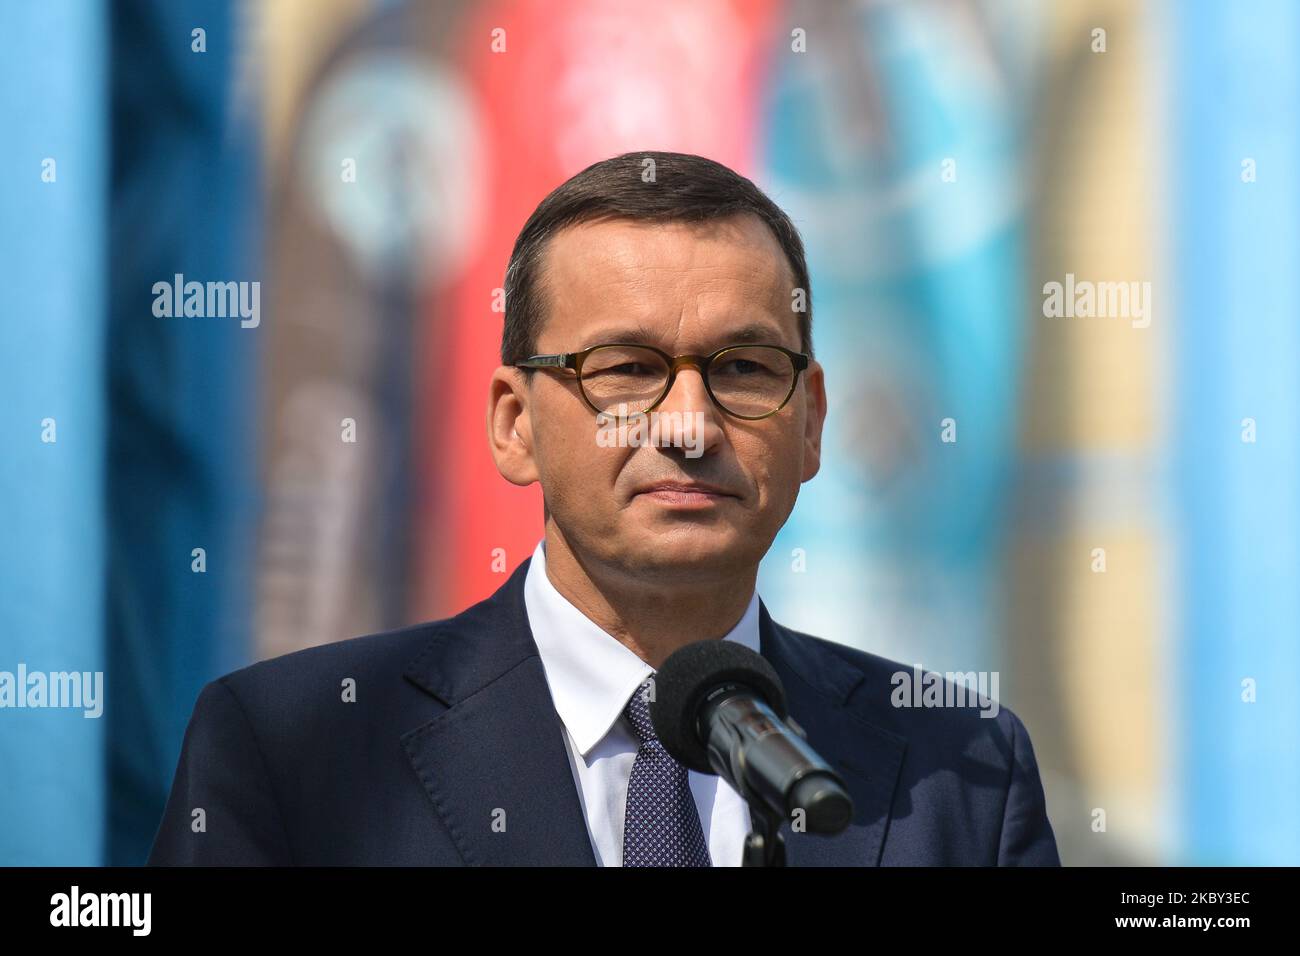 Prime Minister Mateusz Morawiecki speaks to media outside the historic Guido coal mine in Zabrze. In recent days, the Polish prime minister paid another visit to Silesia. This time the reason was the celebration of the 40th anniversary of the foundation of 'Solidarity', the first independent trade union in the former Soviet bloc. On Septemebr 3, 2020, in Zabrze, Silesian Voivodeship, Poland. (Photo by Artur Widak/NurPhoto) Stock Photo